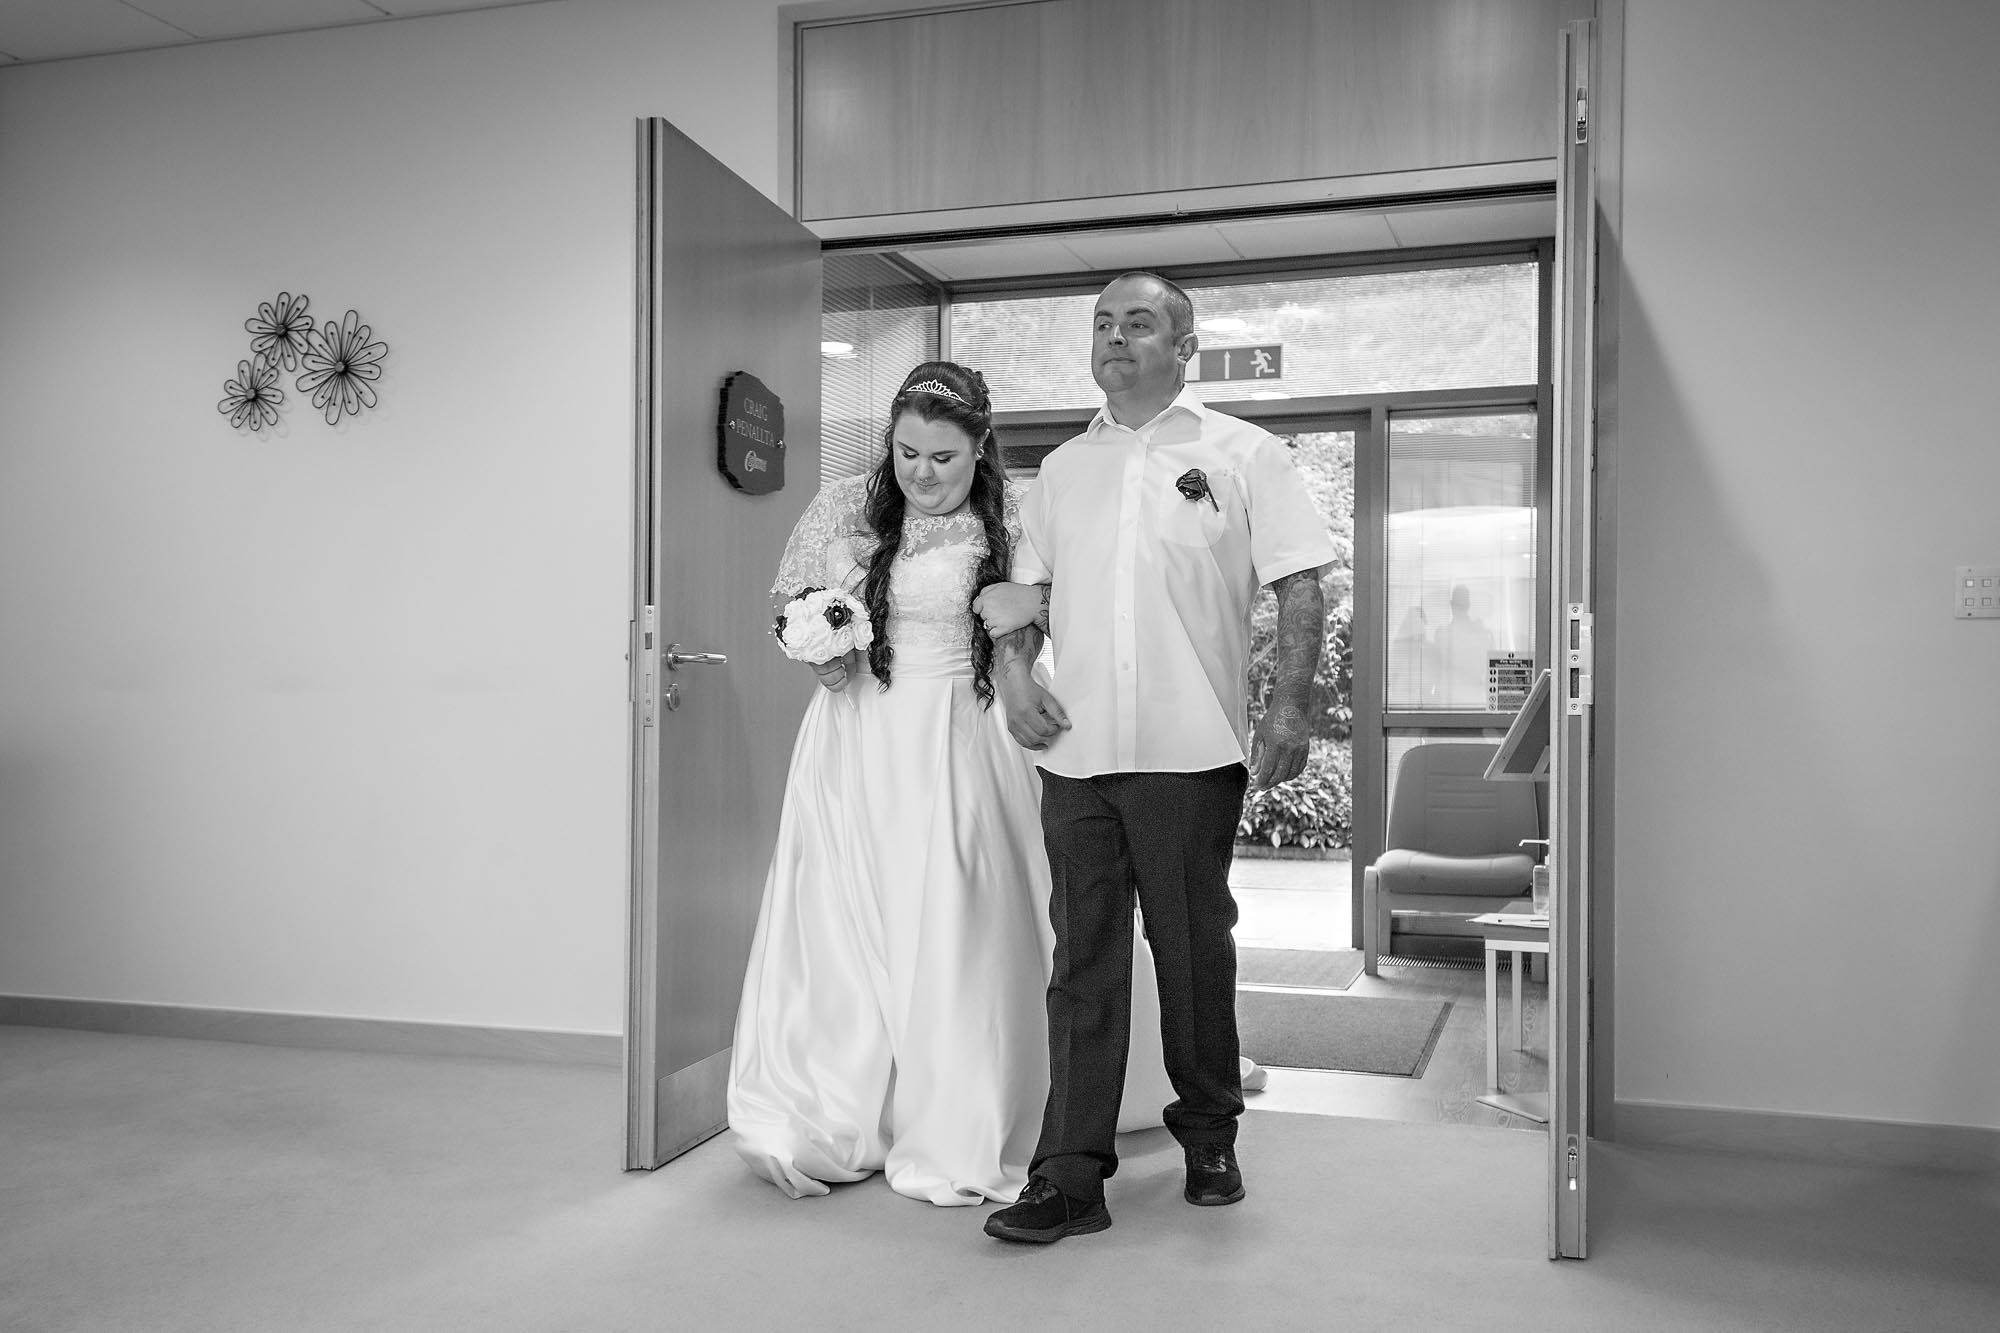 Bride and uncle enter the Ceremony Room at her wedding in Penallta House